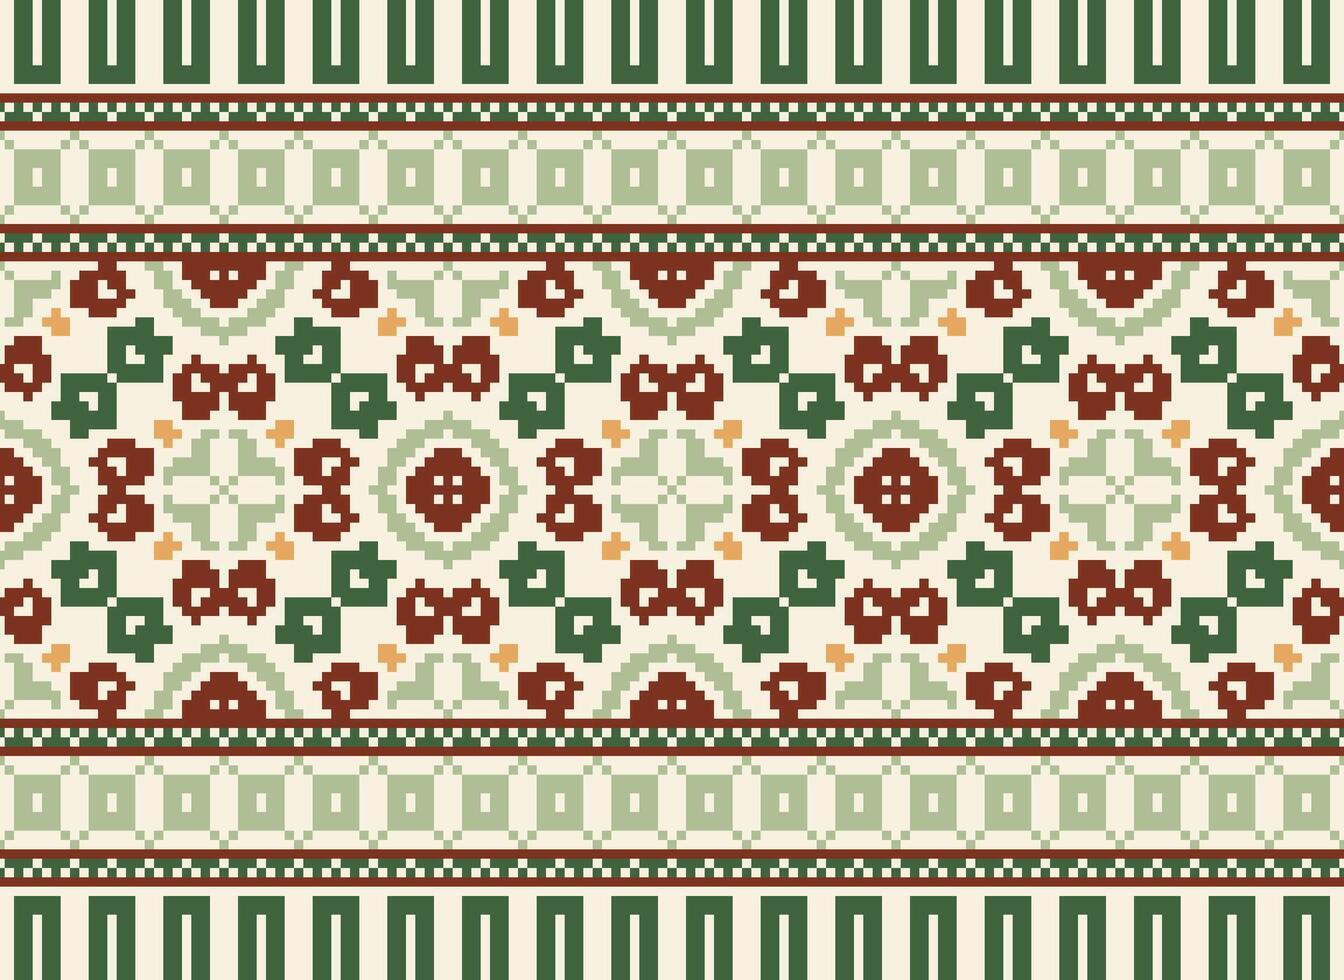 Floral cross stitch embroidery.geometric ethnic oriental seamless pattern traditional background.Aztec style abstract vector illustration.design for texture,fabric,clothing,wrapping,decoration,print.